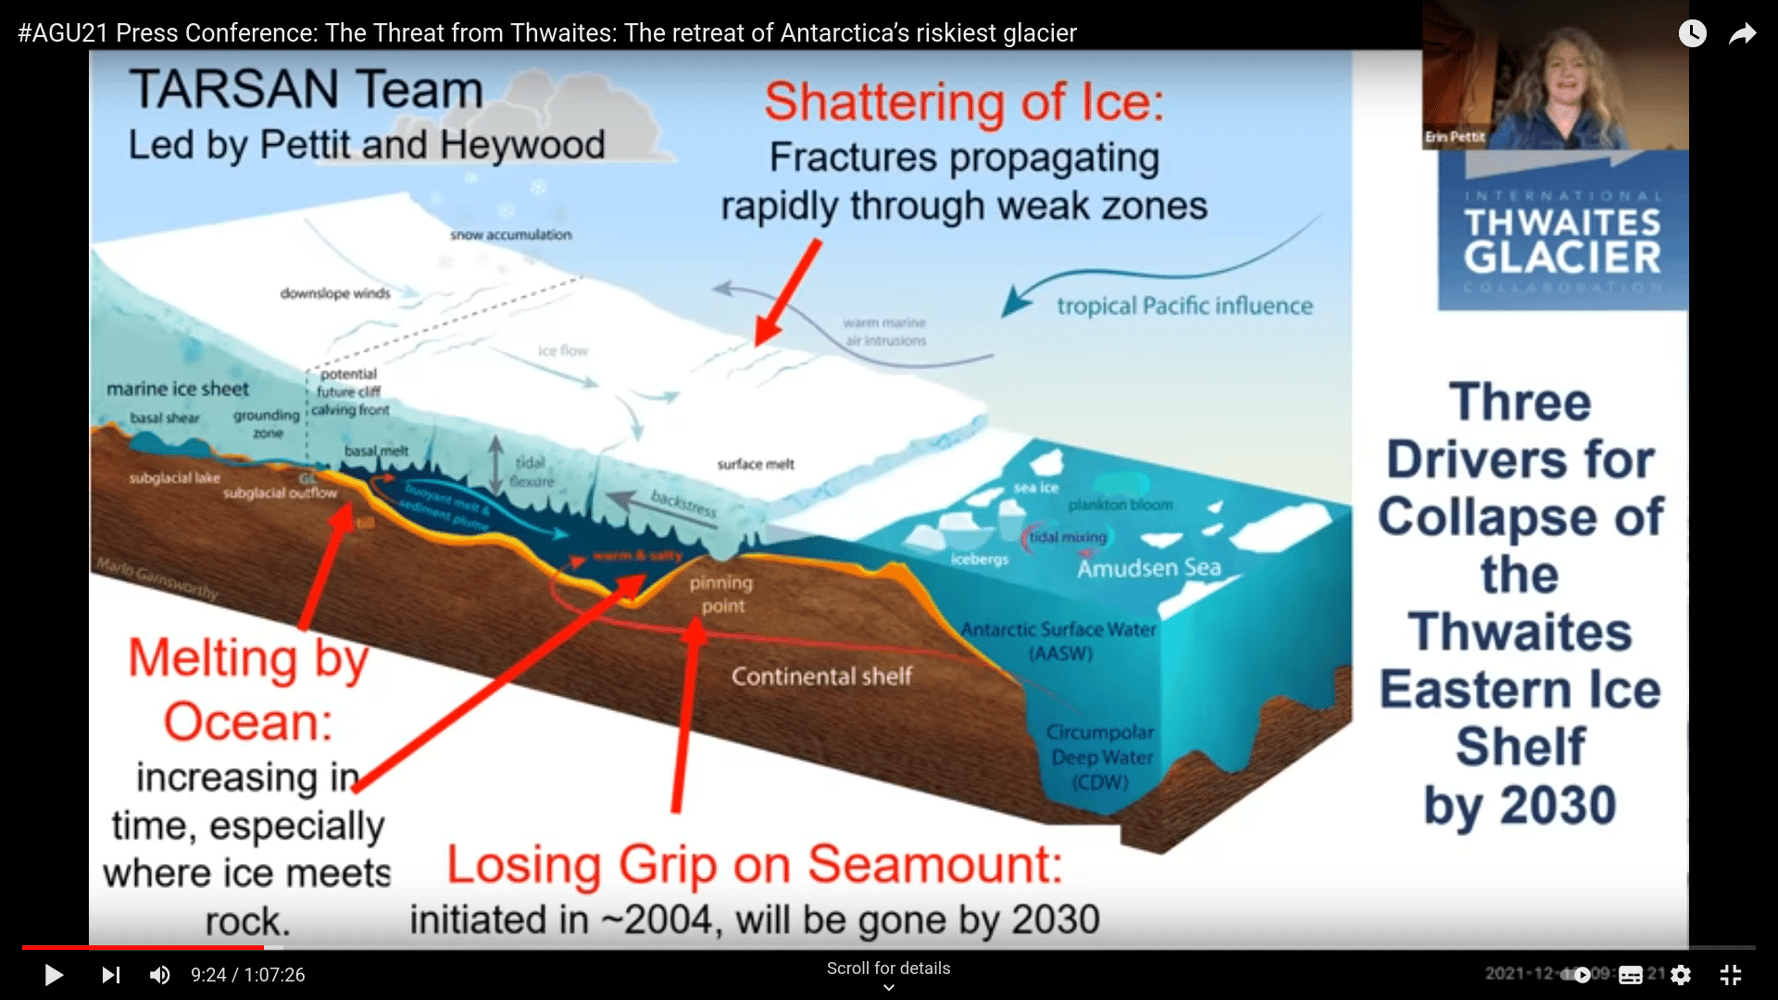 drivers accelerating the break-up of the Thwaites Glacier Eastern Ice Shelf